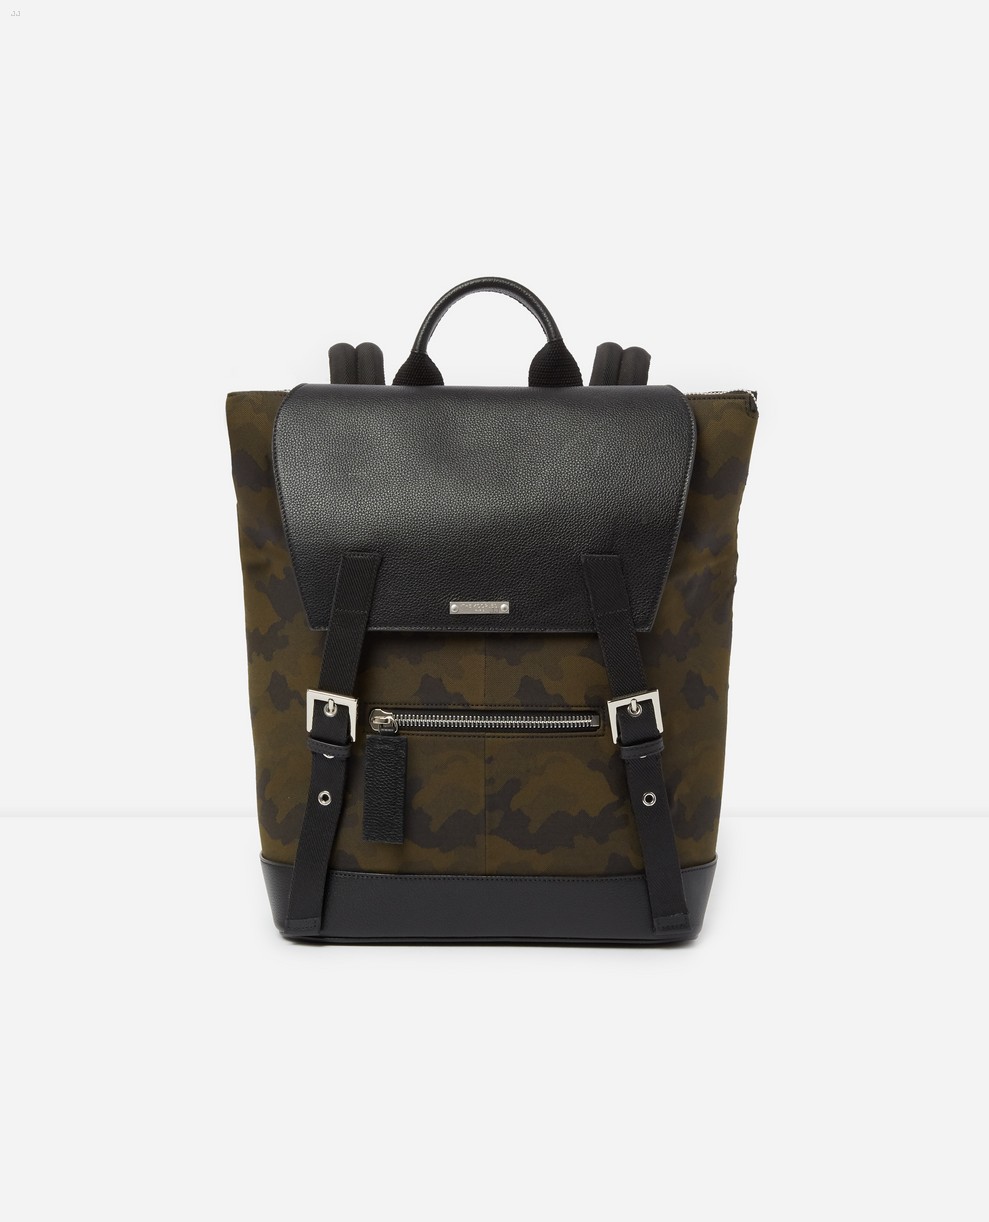 Zayn Malik Designs Two Backpacks For The Kooples Fall Collection ...